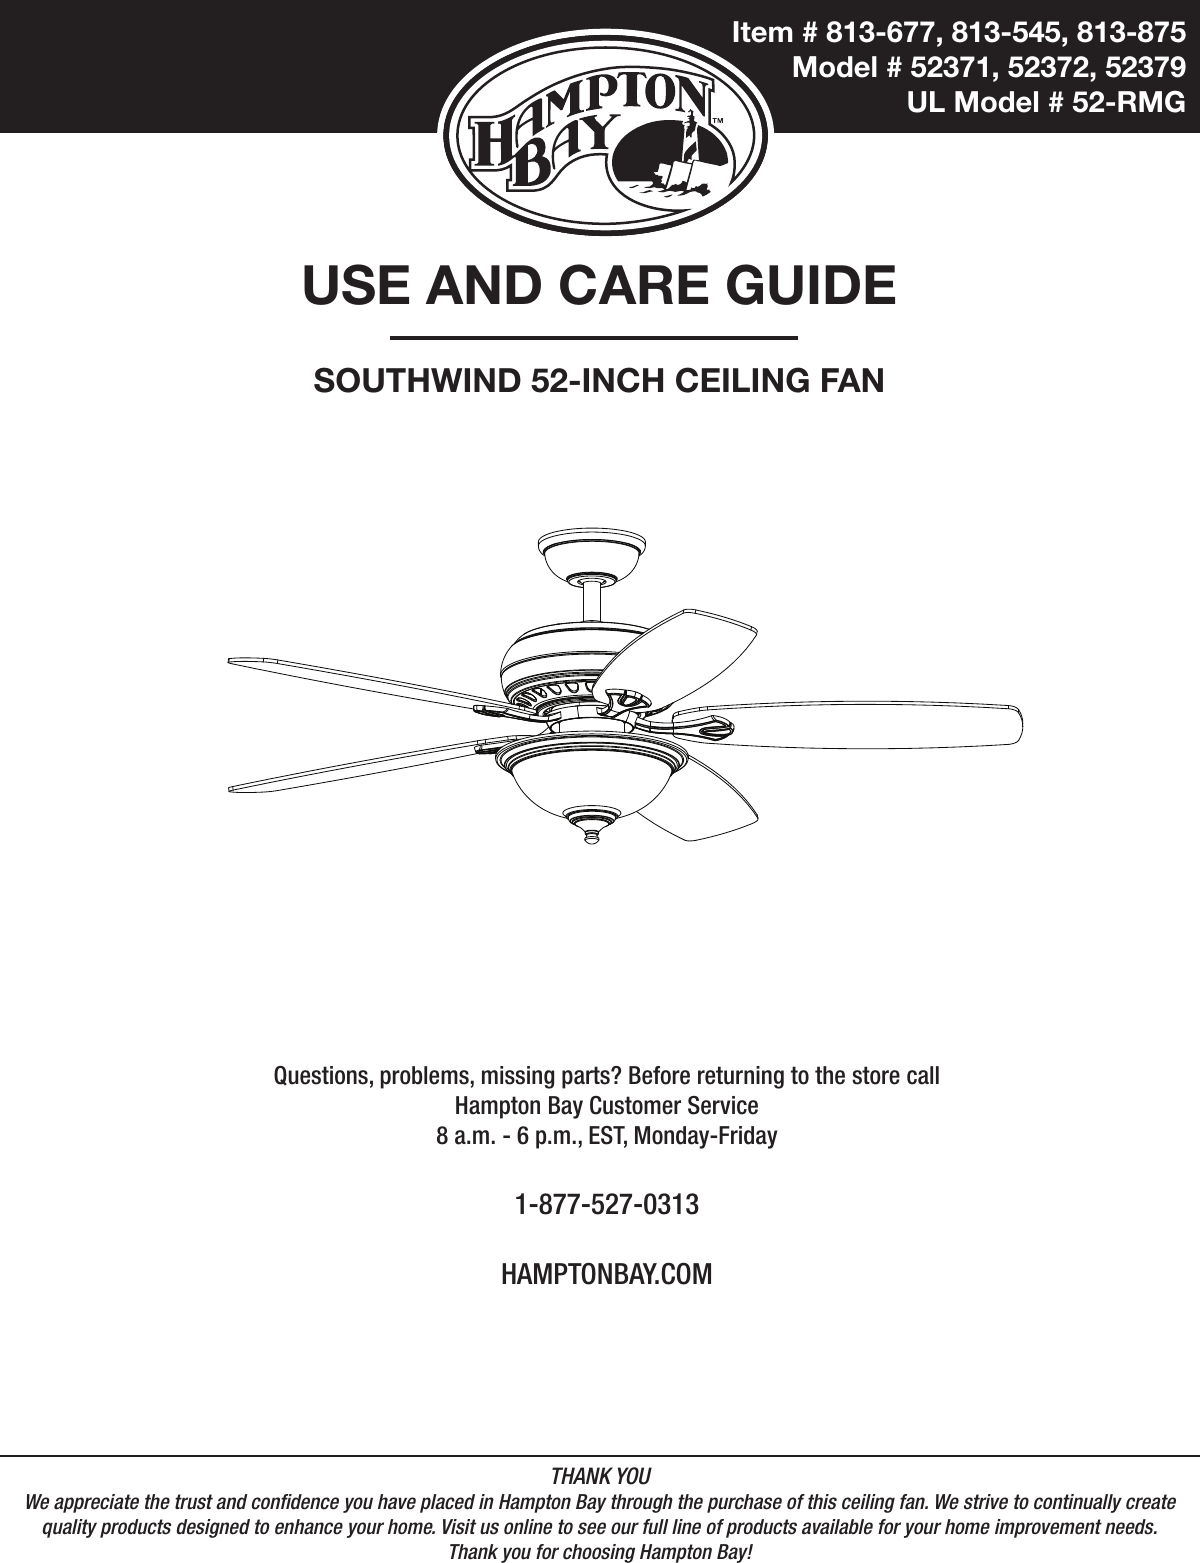 Item # 813-677, 813-545, 813-875  Model # 52371, 52372, 52379UL Model # 52-RMGUSE AND CARE GUIDESOUTHWIND 52-INCH CEILING FANQuestions, problems, missing parts? Before returning to the store call Hampton Bay Customer Service8 a.m. - 6 p.m., EST, Monday-Friday1-877-527-0313HAMPTONBAY.COMTHANK YOUWe appreciate the trust and condence you have placed in Hampton Bay through the purchase of this ceiling fan. We strive to continually createquality products designed to enhance your home. Visit us online to see our full line of products available for your home improvement needs. Thank you for choosing Hampton Bay!